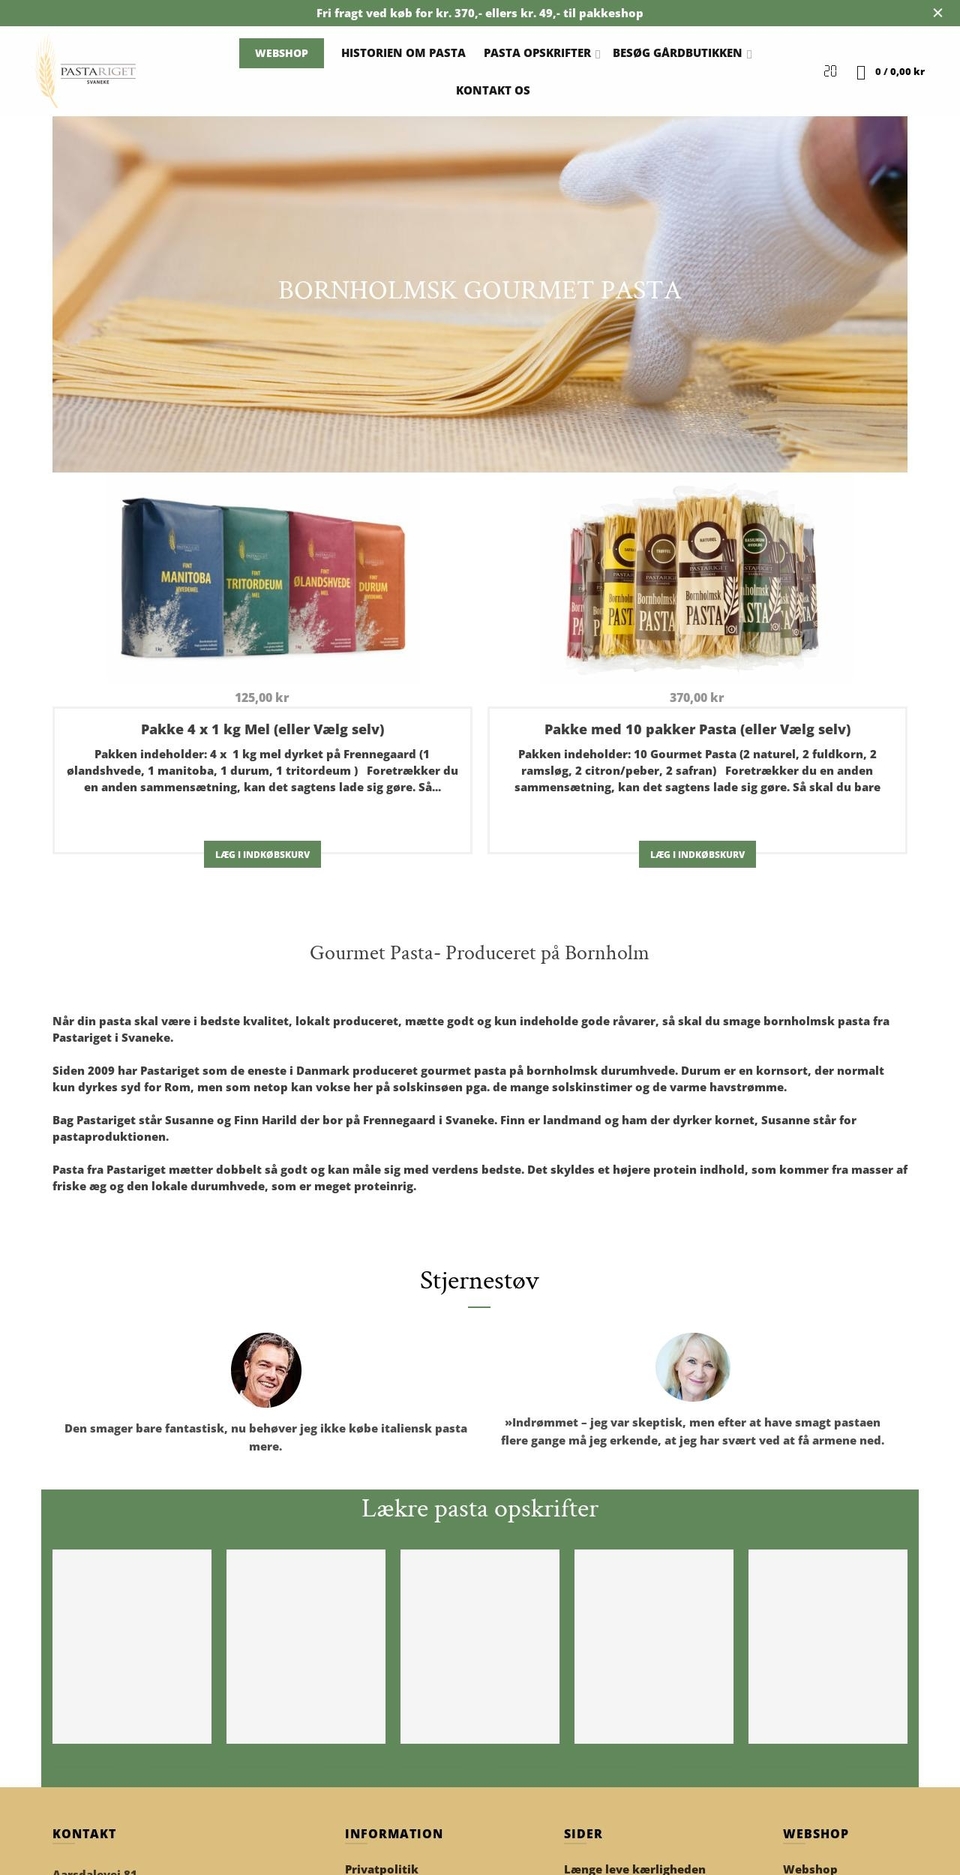 basel Shopify theme site example pastariget.dk